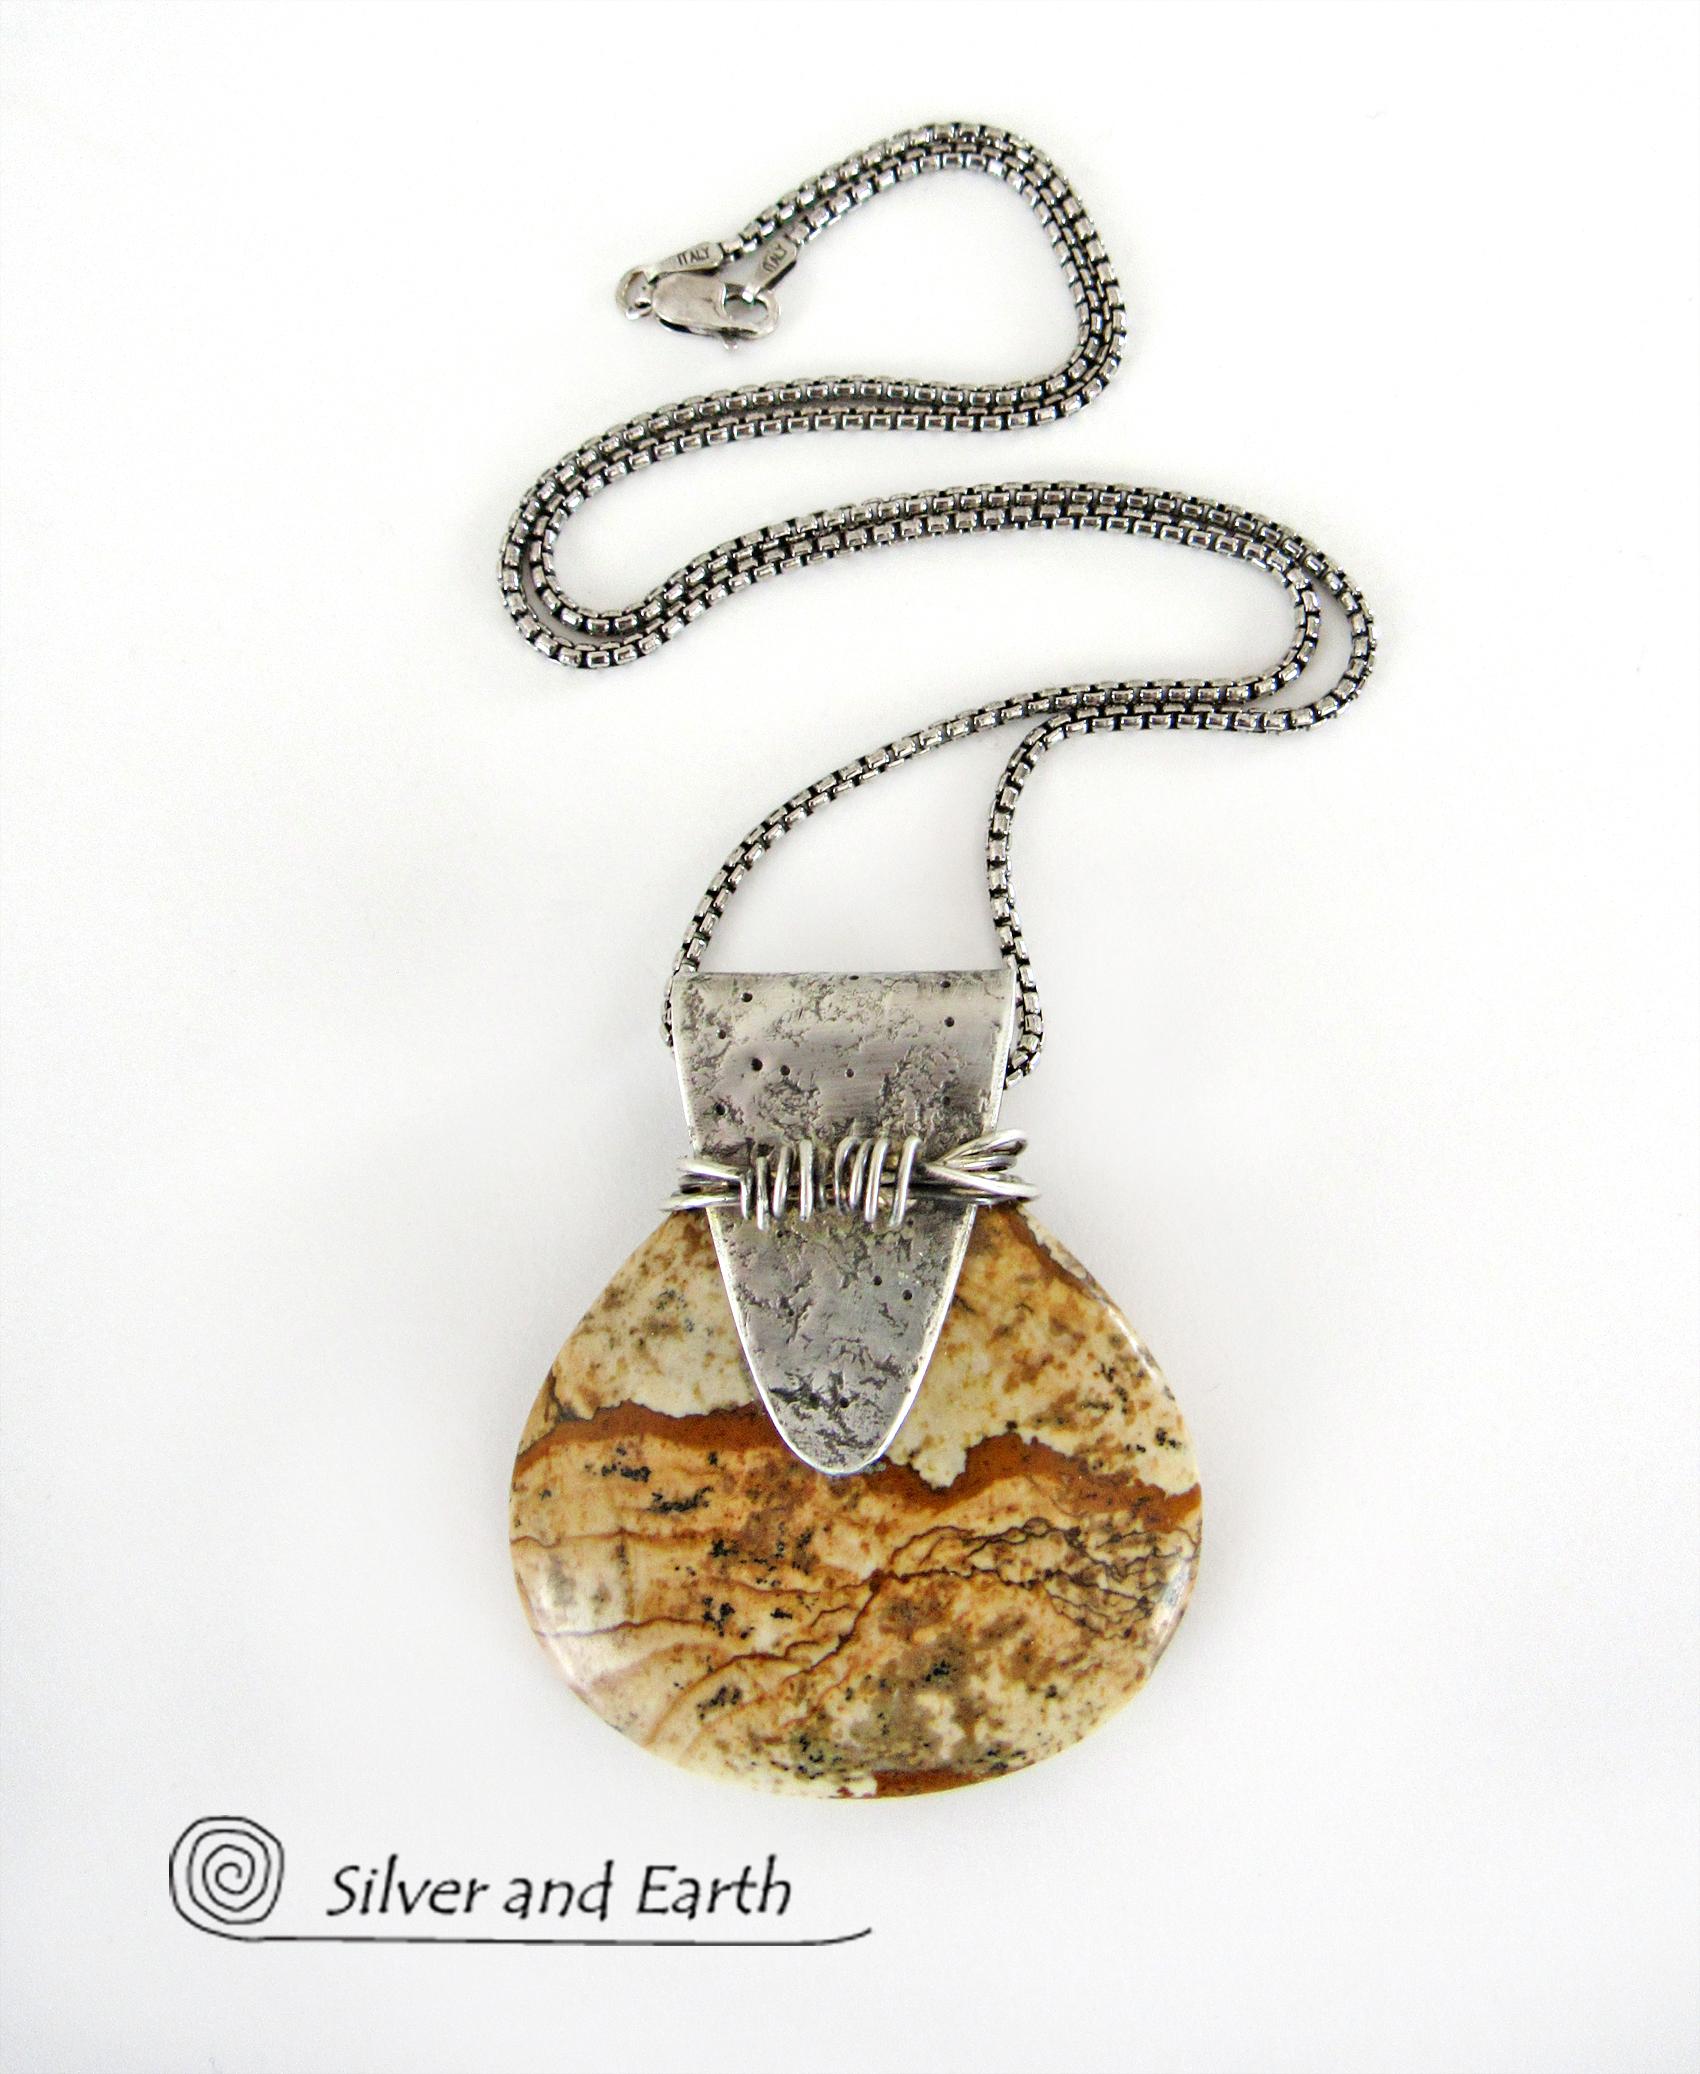 Picture Jasper Sterling Silver Necklace - Unique Handmade One of Kind Jewelry